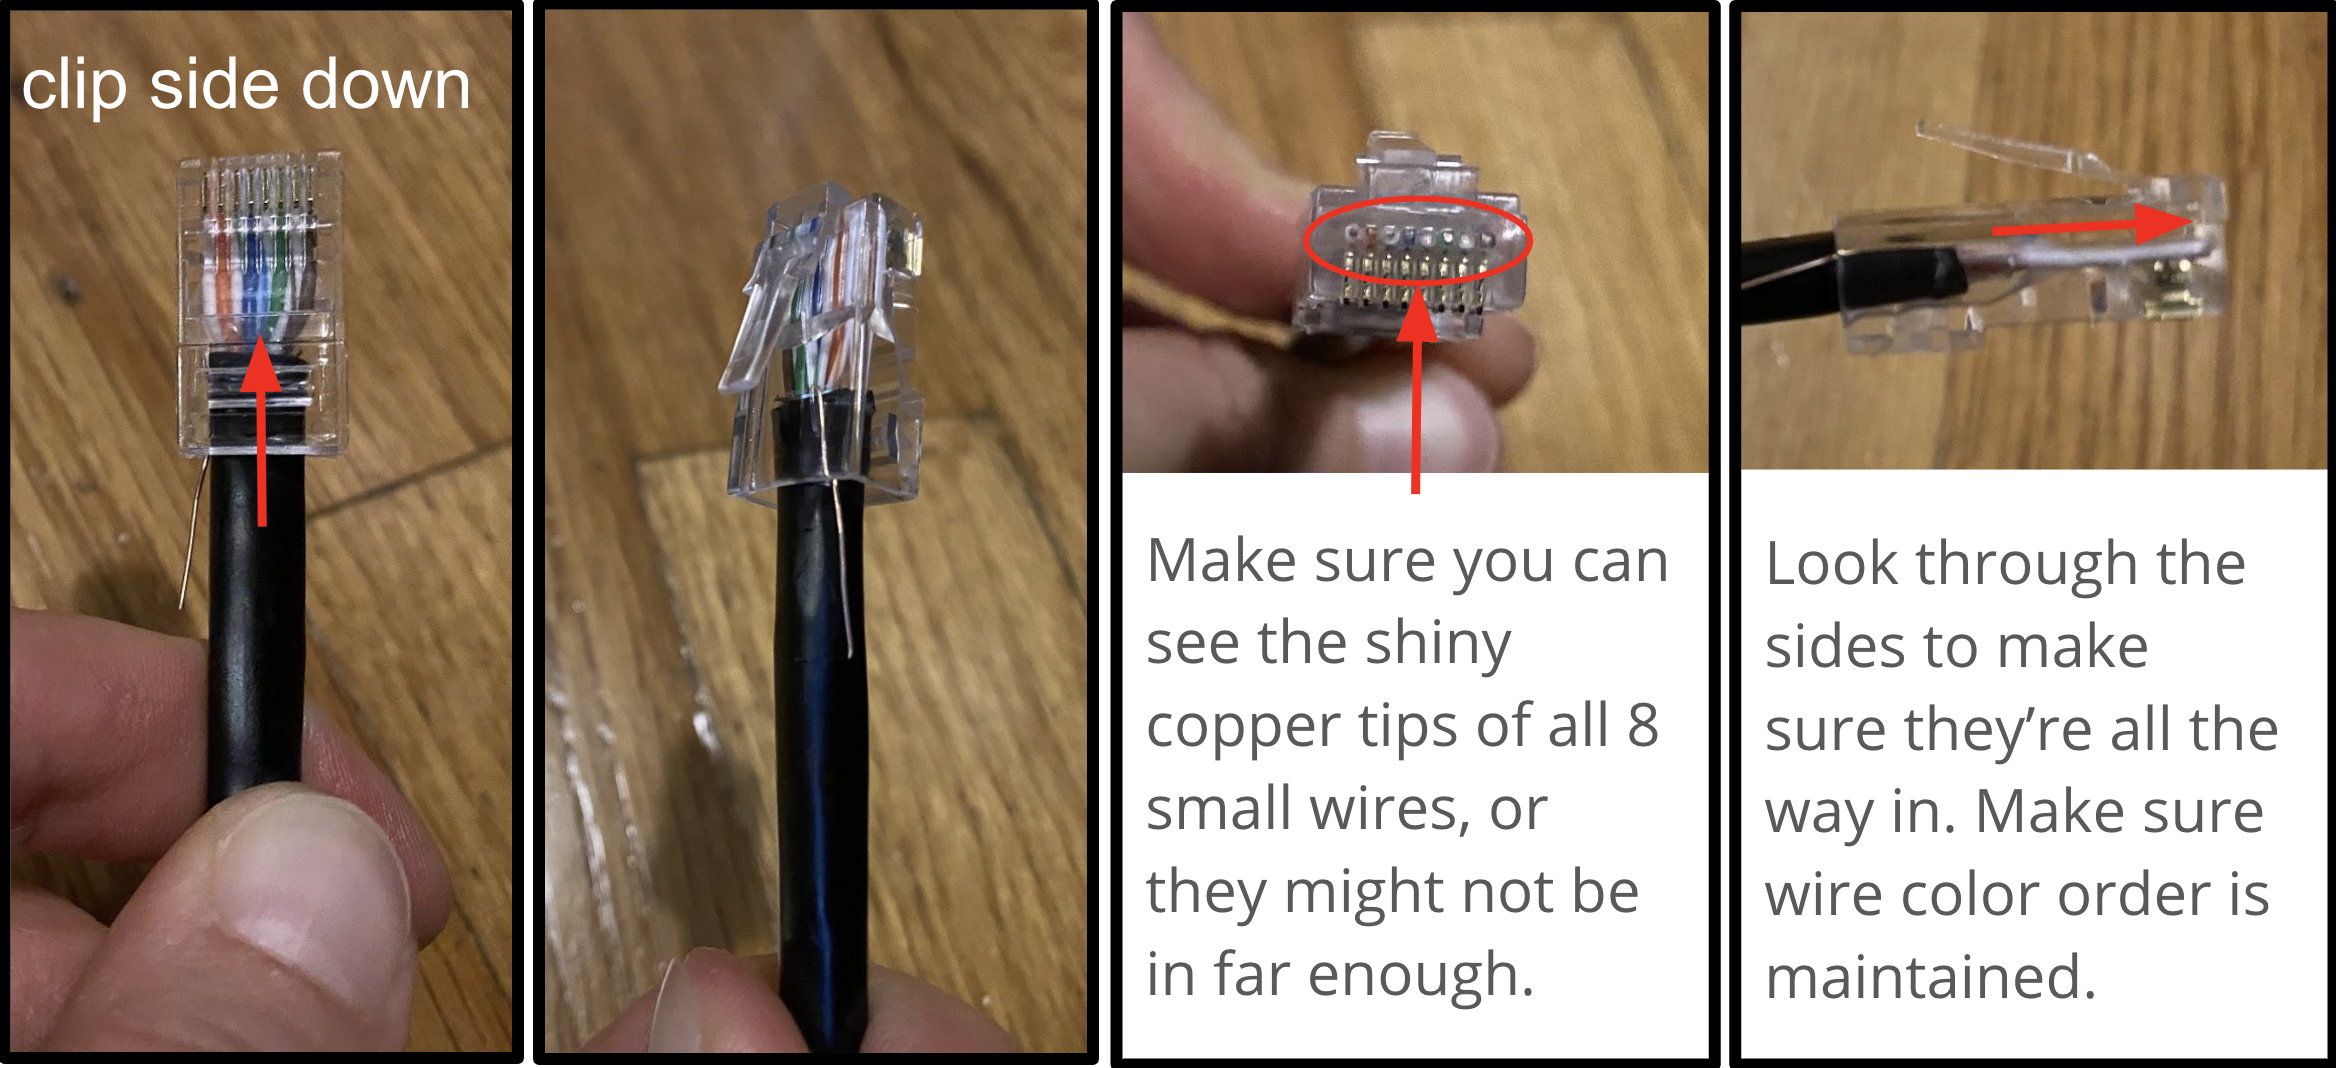 Wires inserted into RJ45 connector with clip-side down